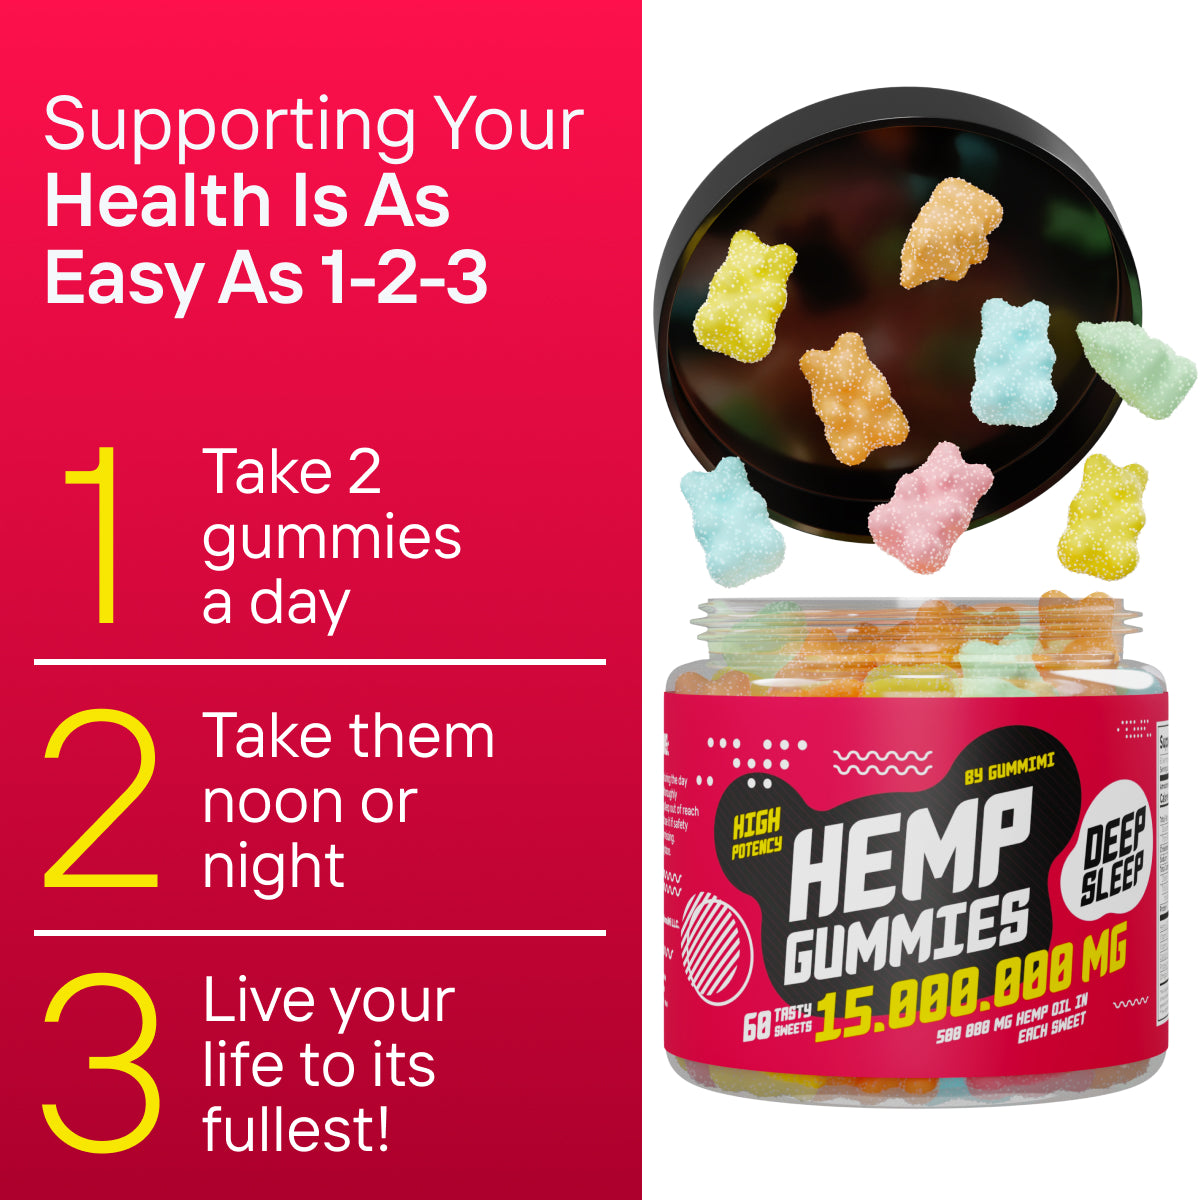 Hеmp Gummies for Deep and Healthy Bеdtime - Ensure the Peace of Body - Assorted Fruit Flavors - Hеmp Oil Infused Gummy Vitamins - Made in USA